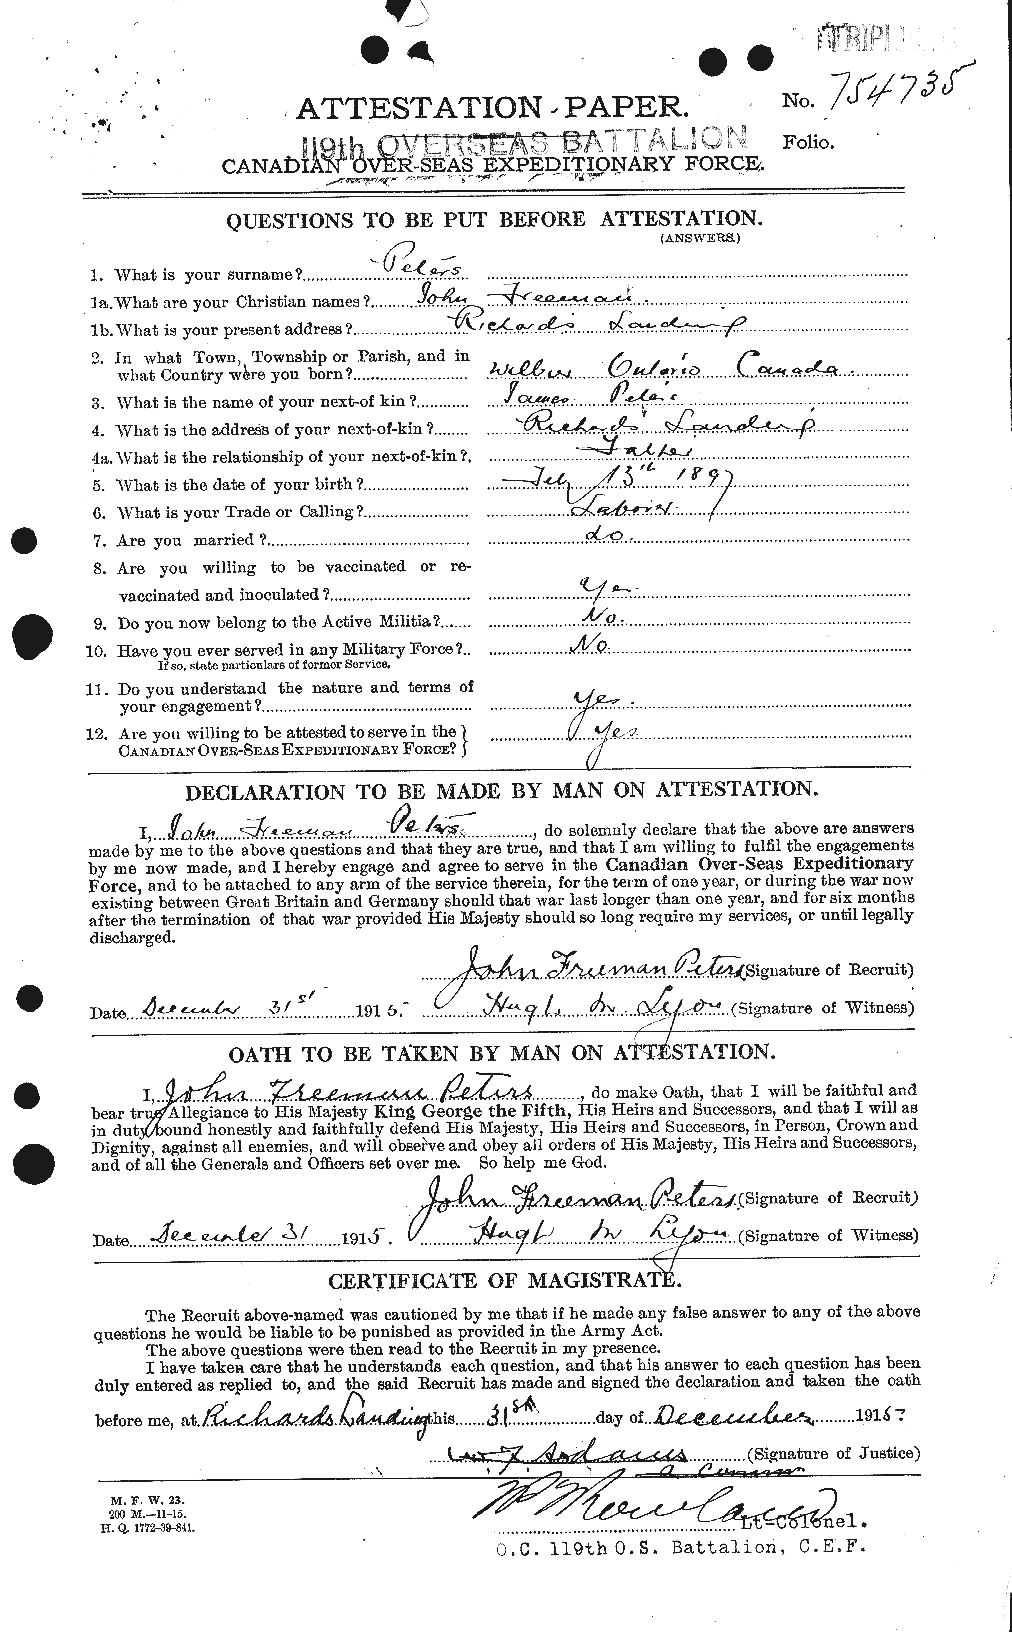 Personnel Records of the First World War - CEF 575548a